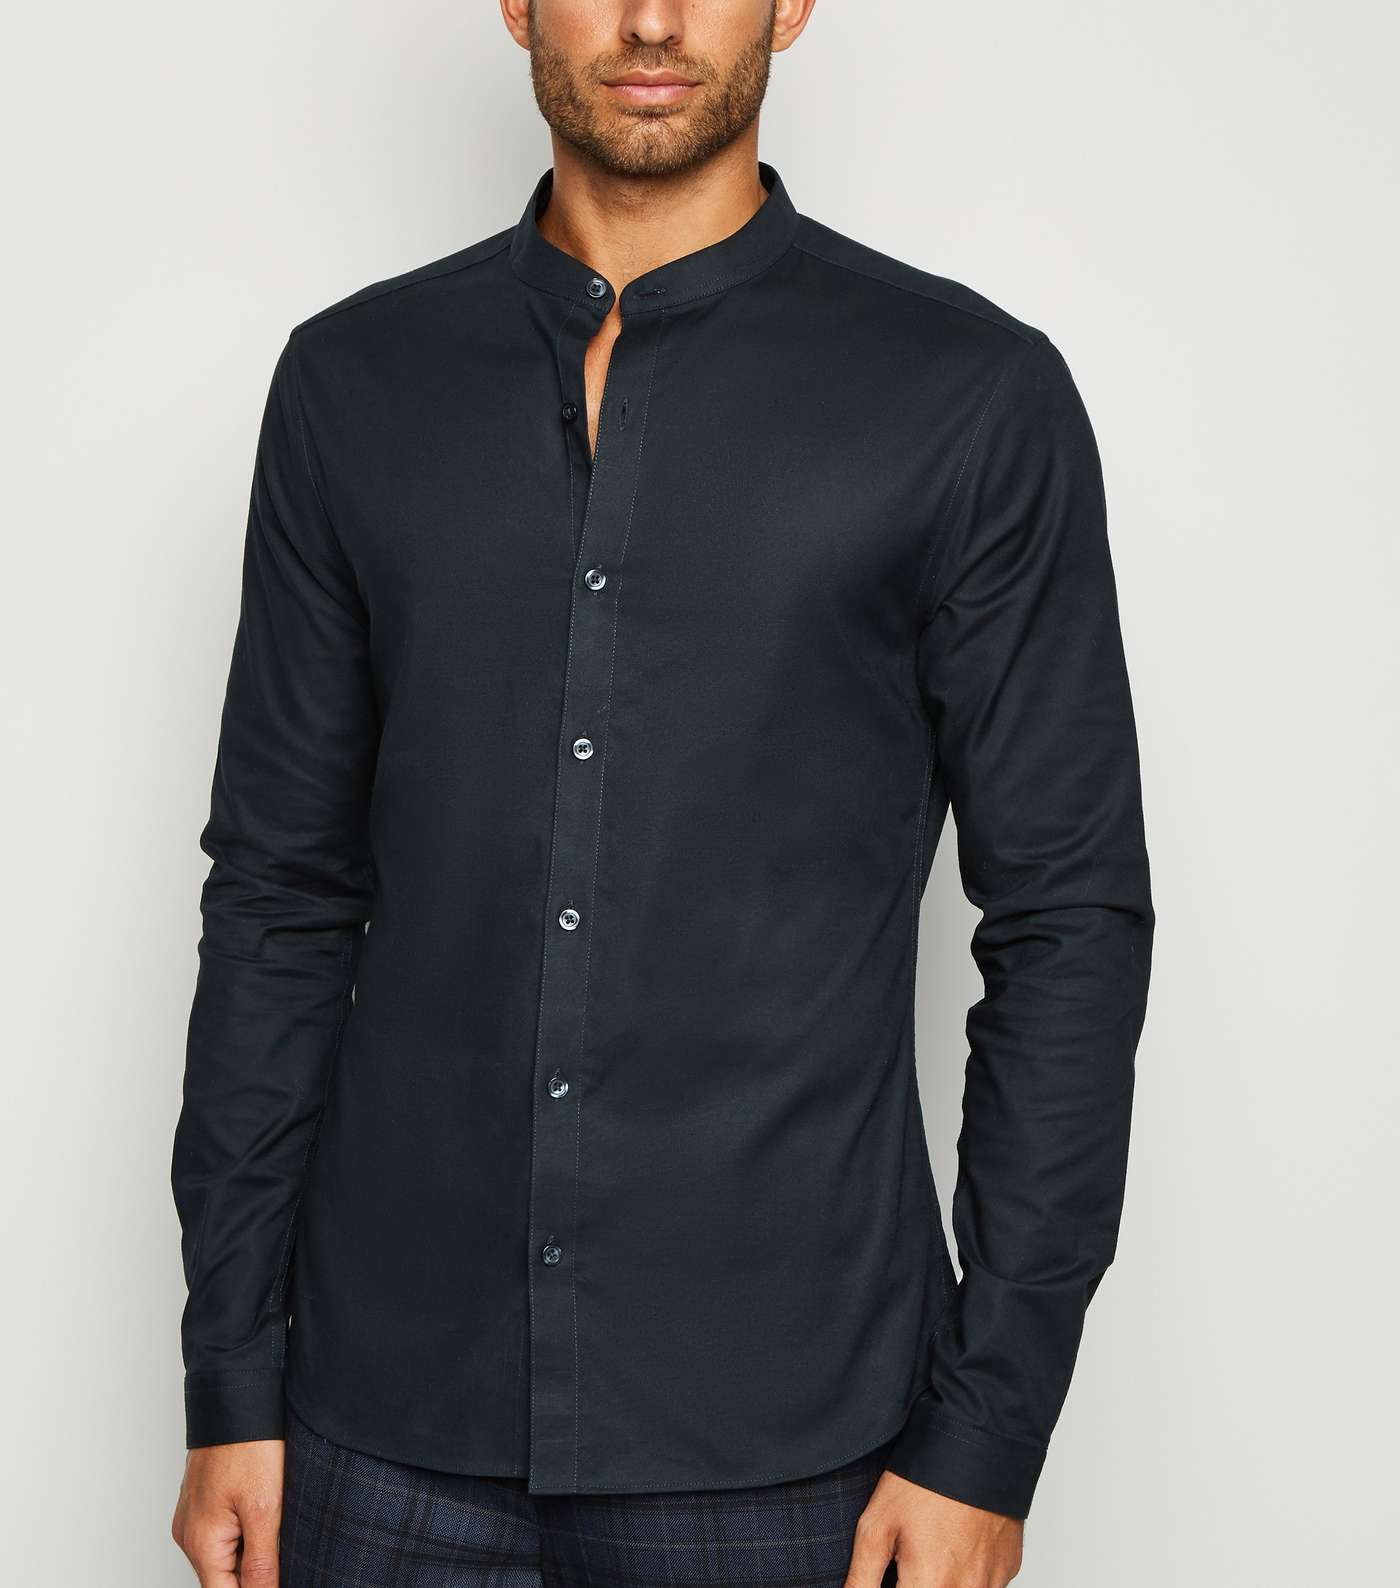 Navy Muscle Fit Grandad Oxford Shirt